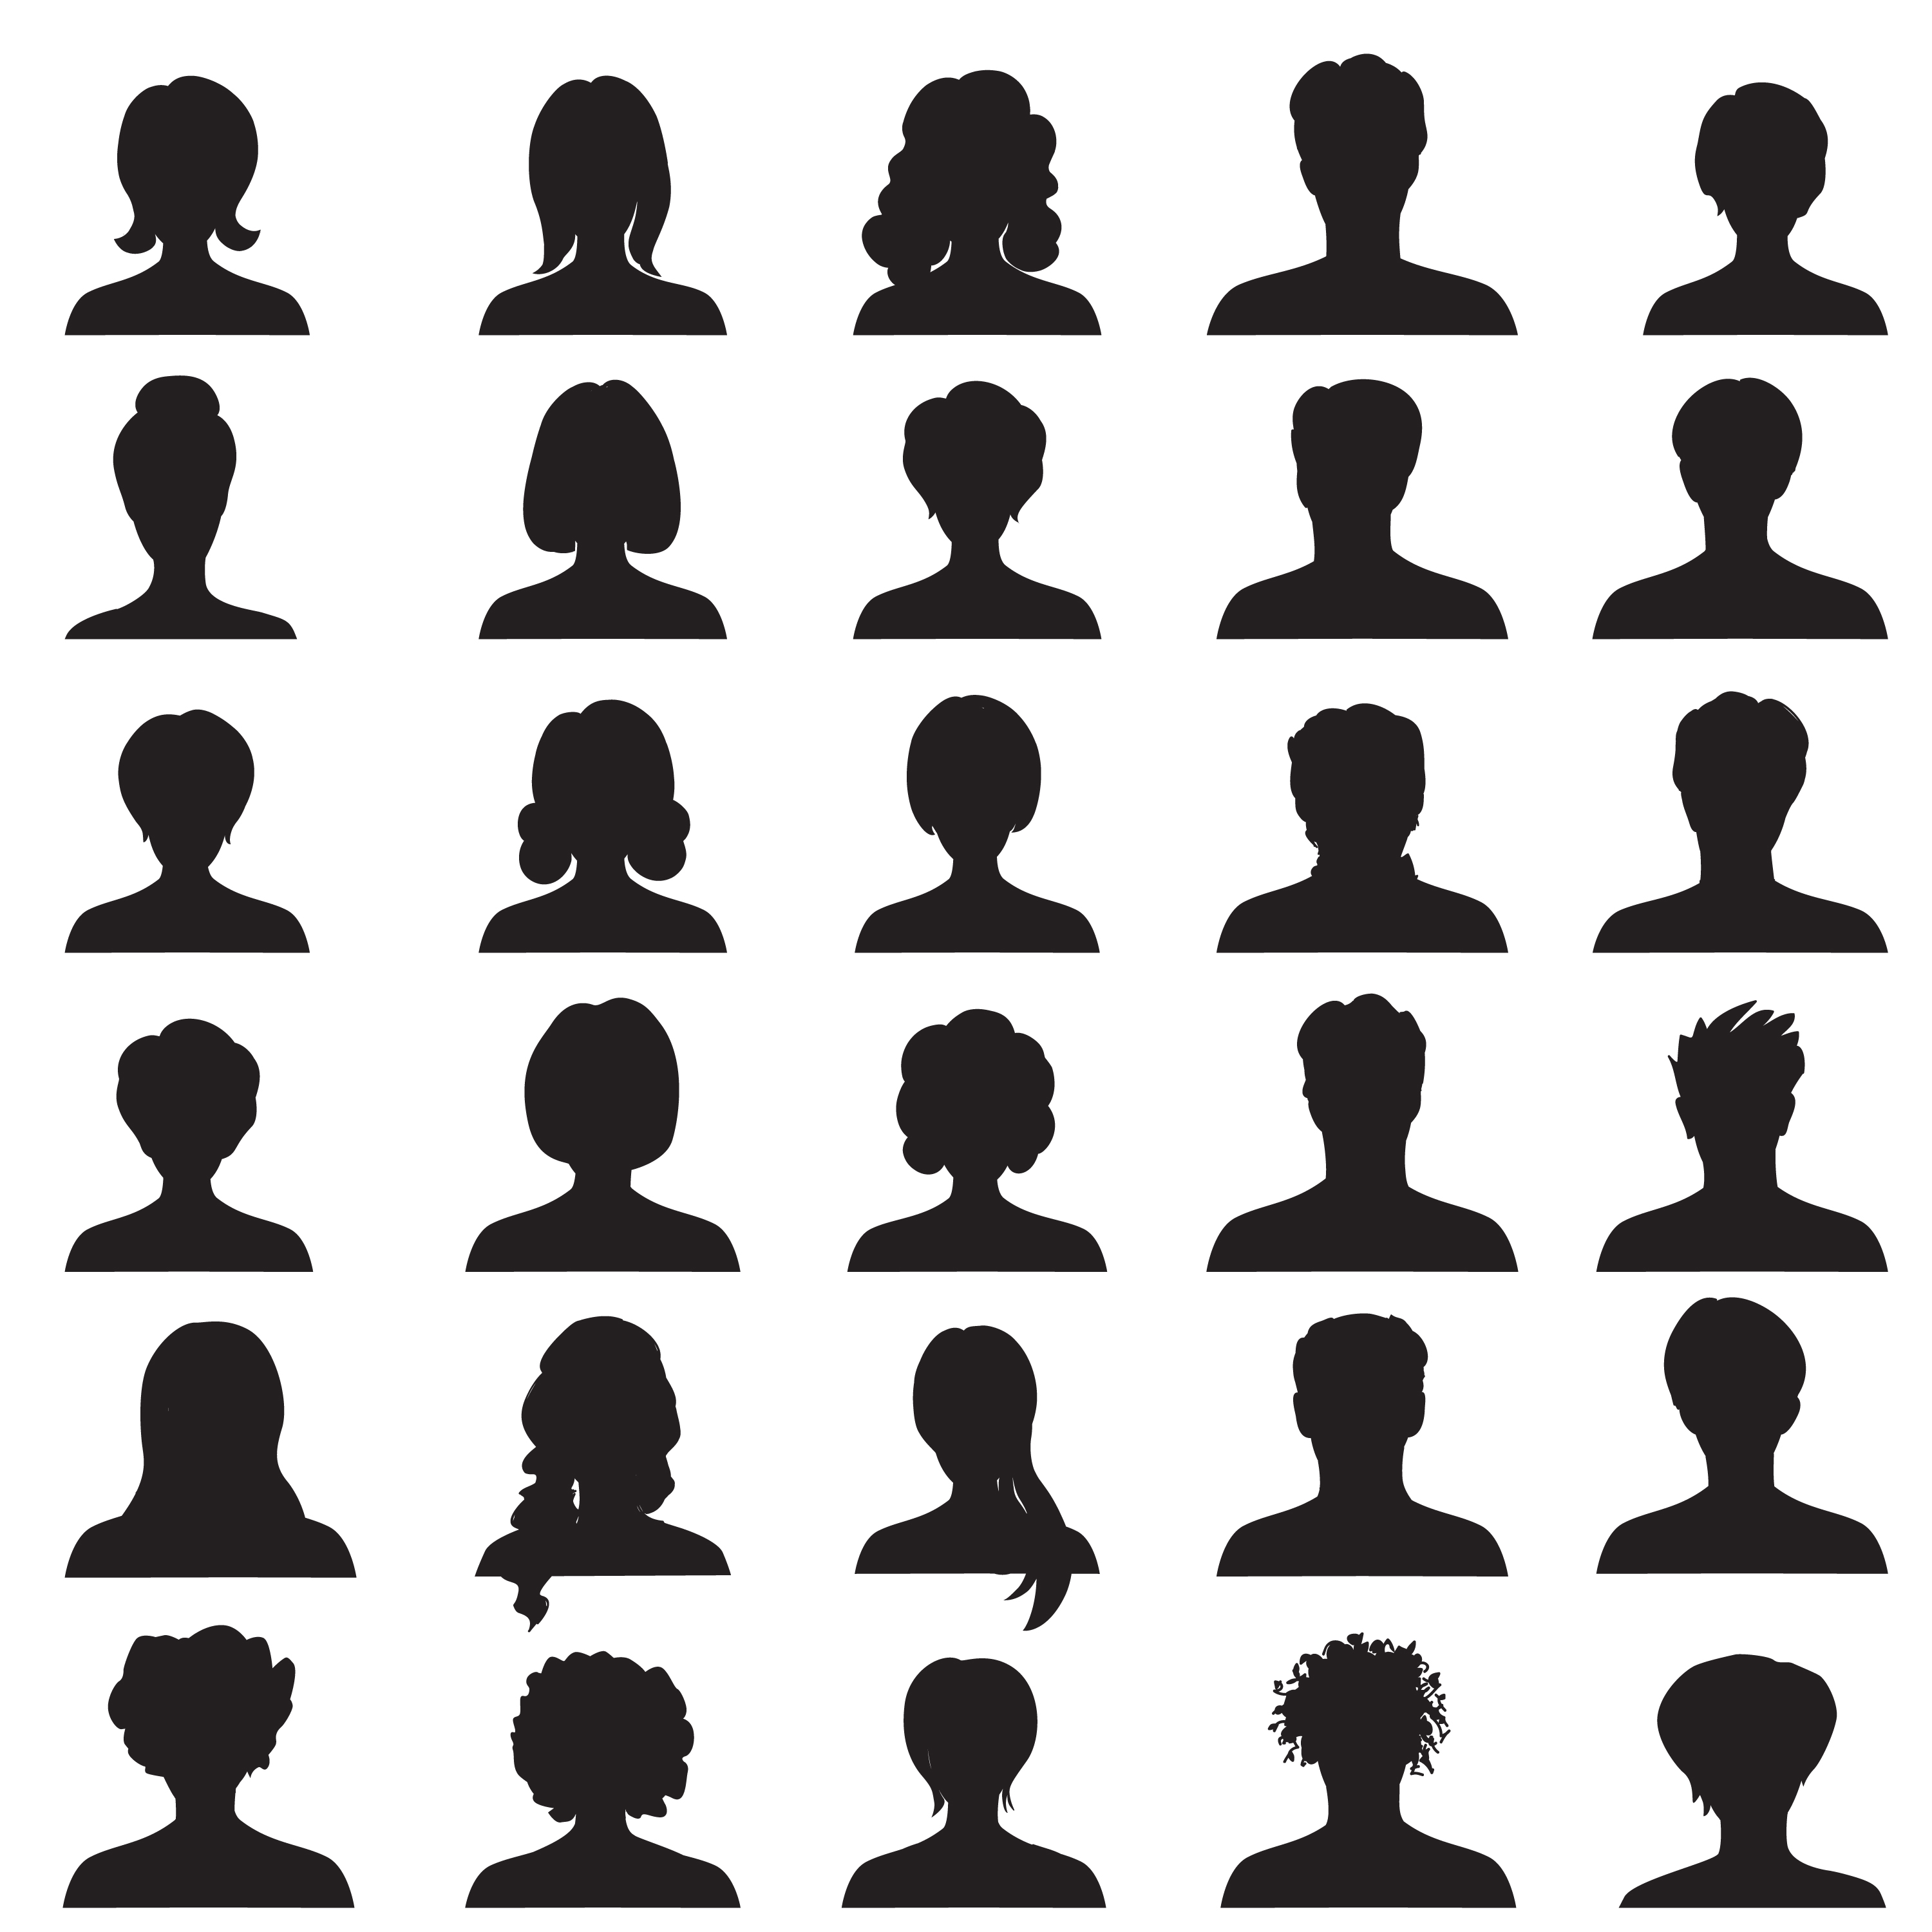 Set Of Avatar Or User Icons. Vector Illustration. Silhouette Of